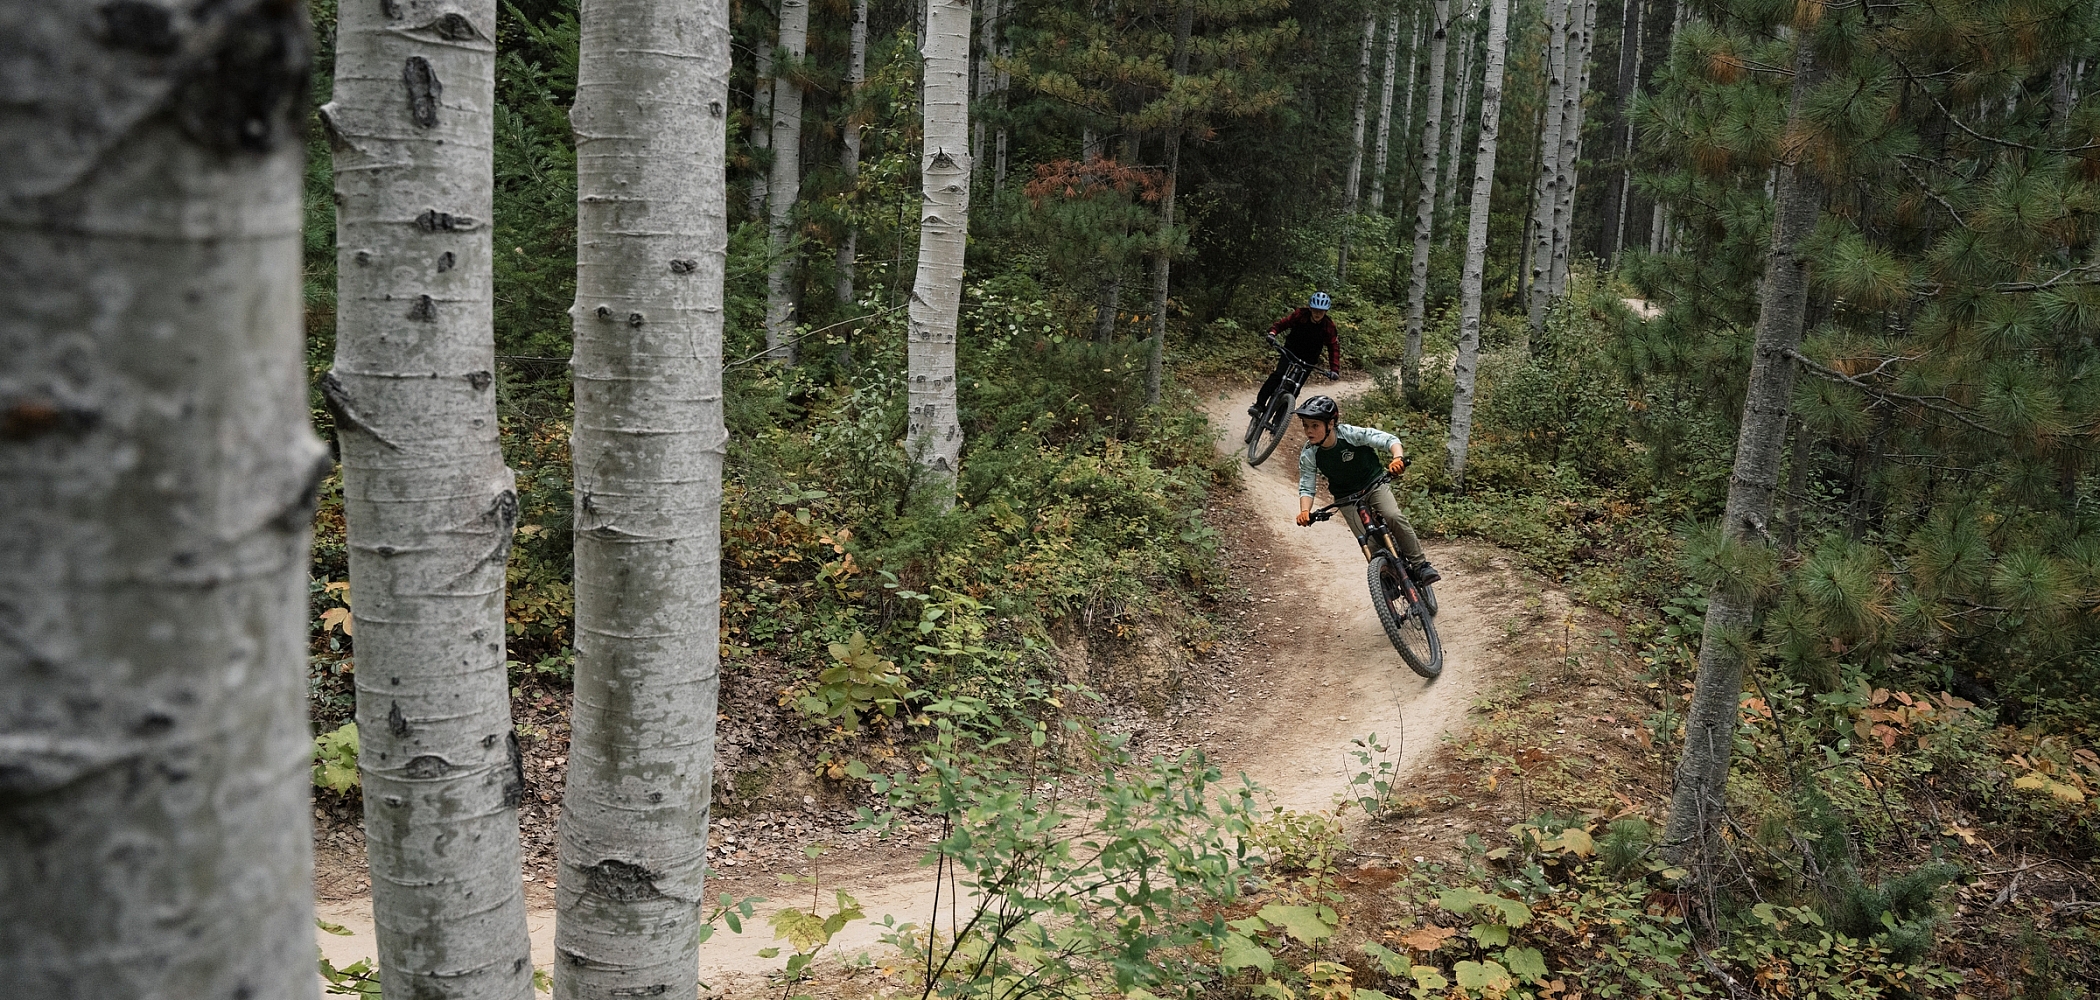 Two bikers riding down a dirt single-track trail through the forest.